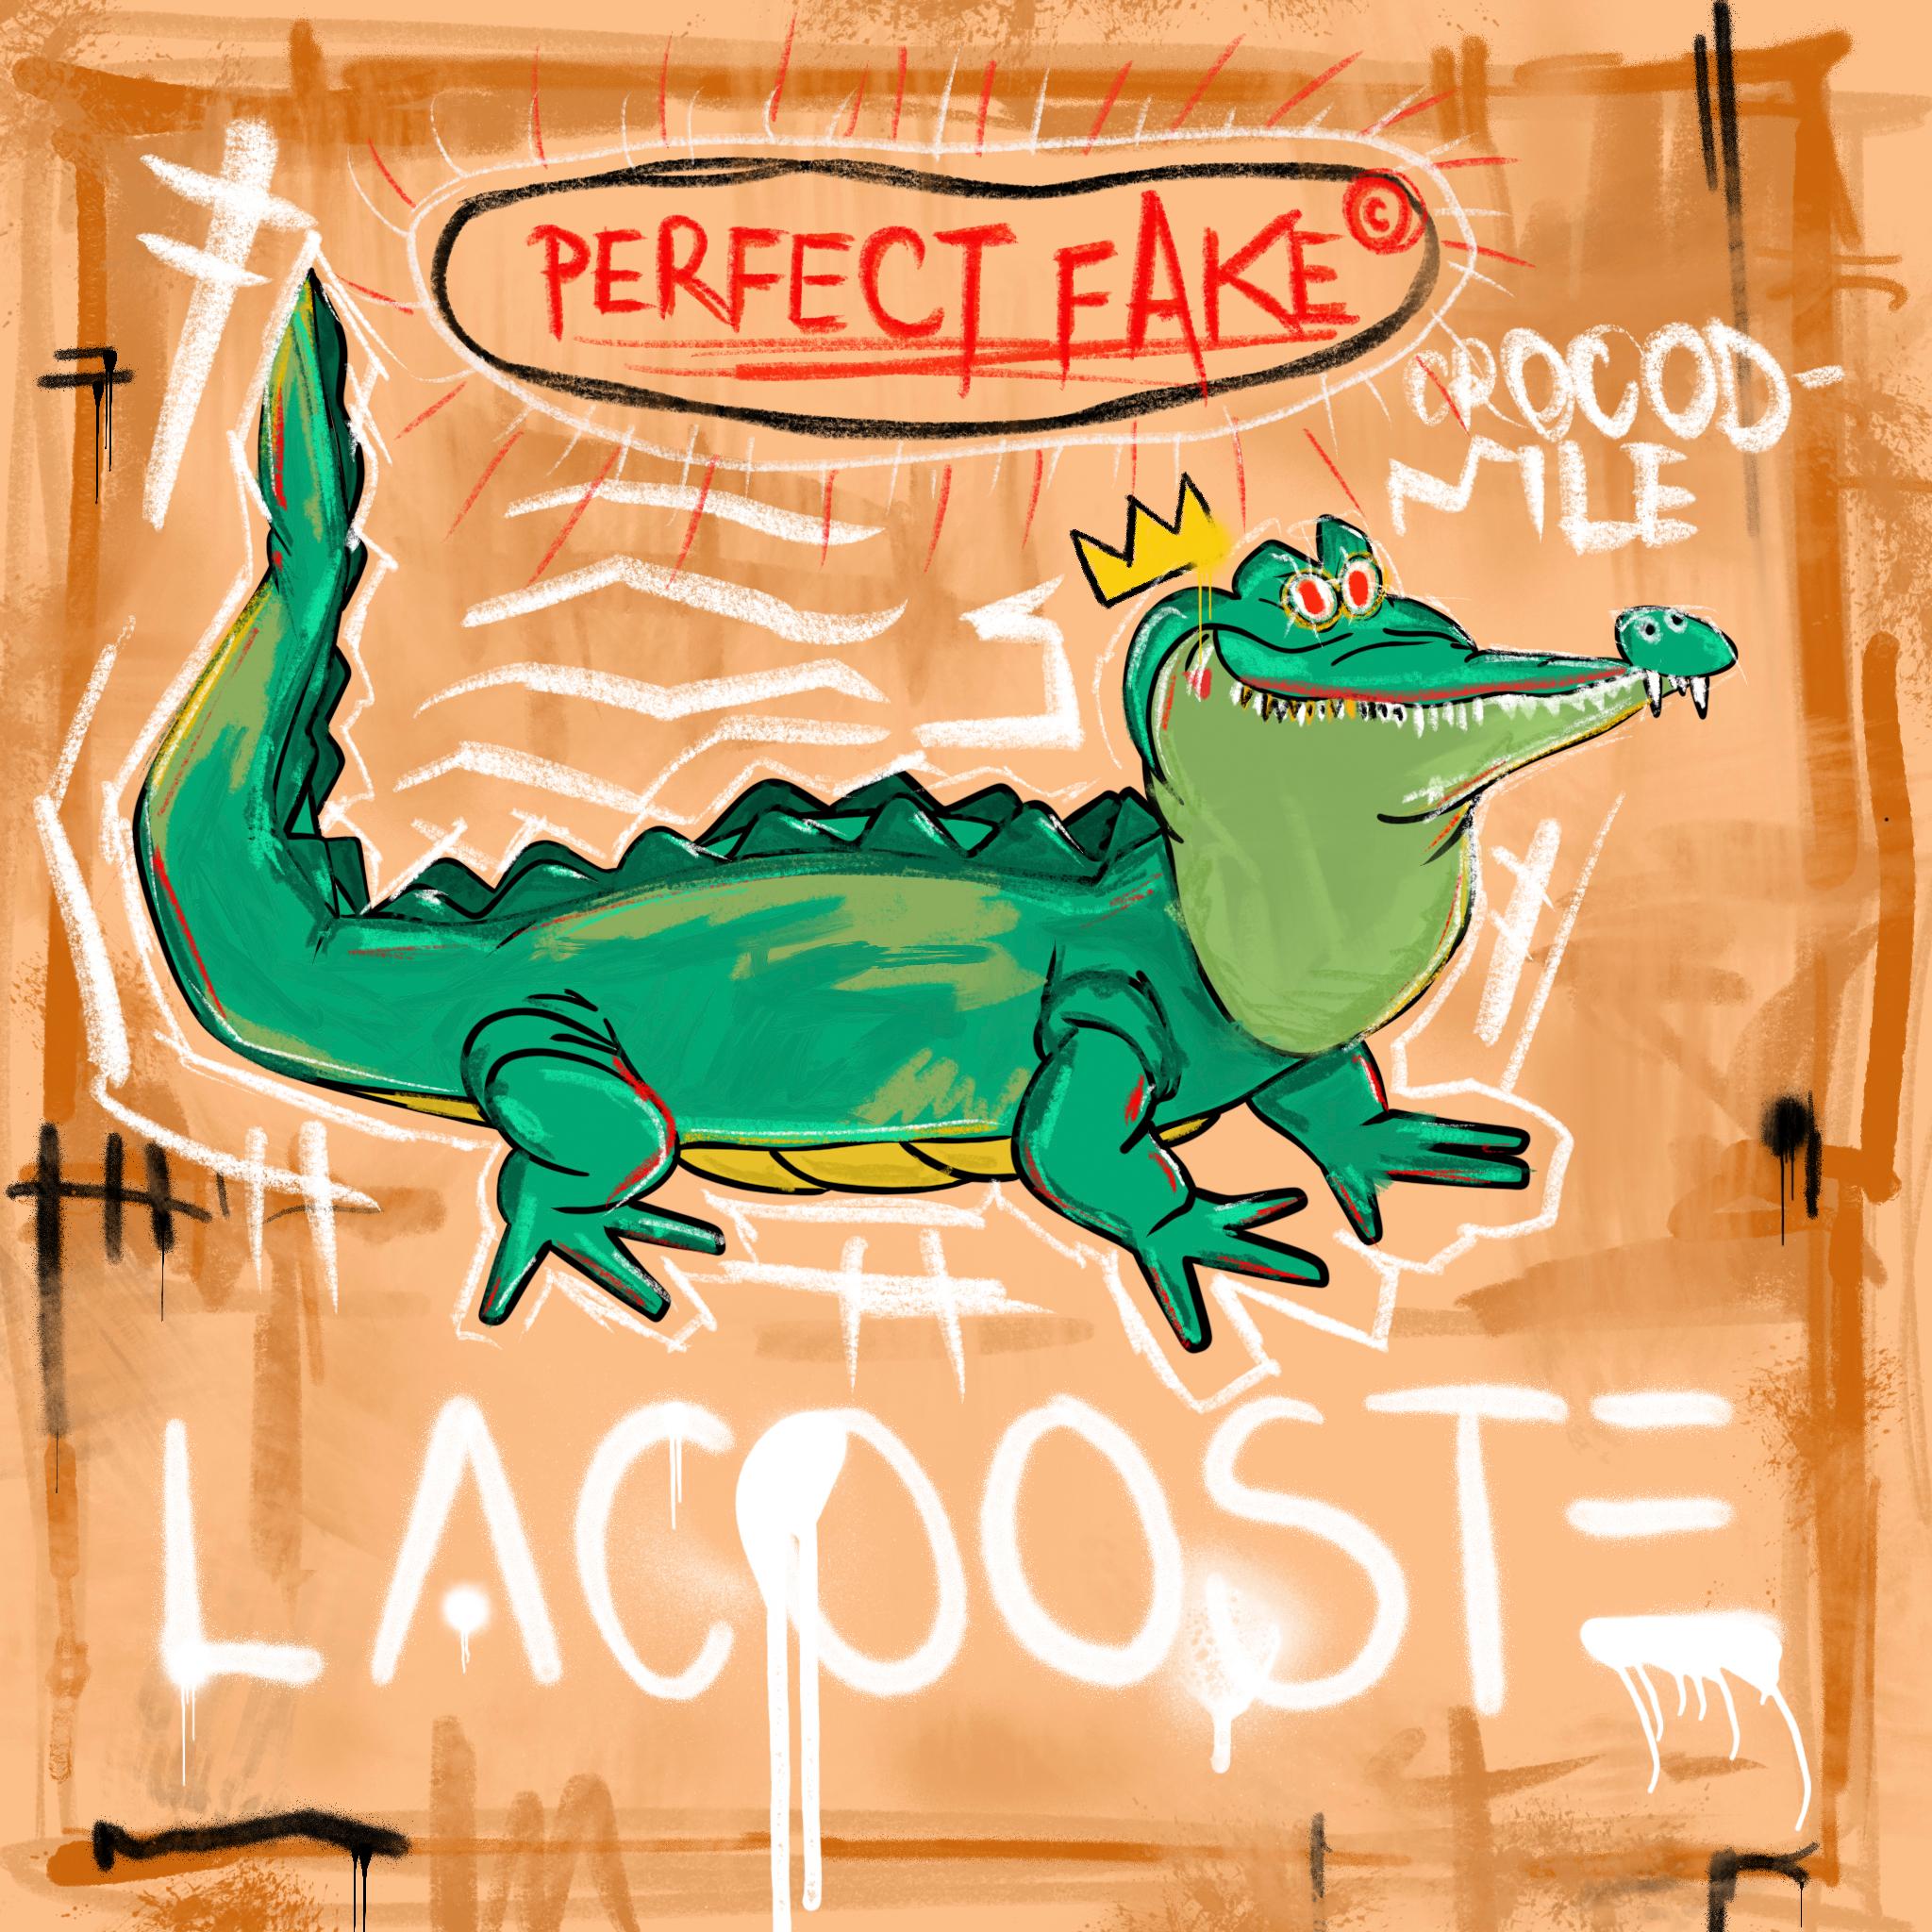 Jay-C - Perfect Fake, Pop Art, Street Art, Croco, Lacoste, Basquiat,  Painting For Sale at 1stDibs